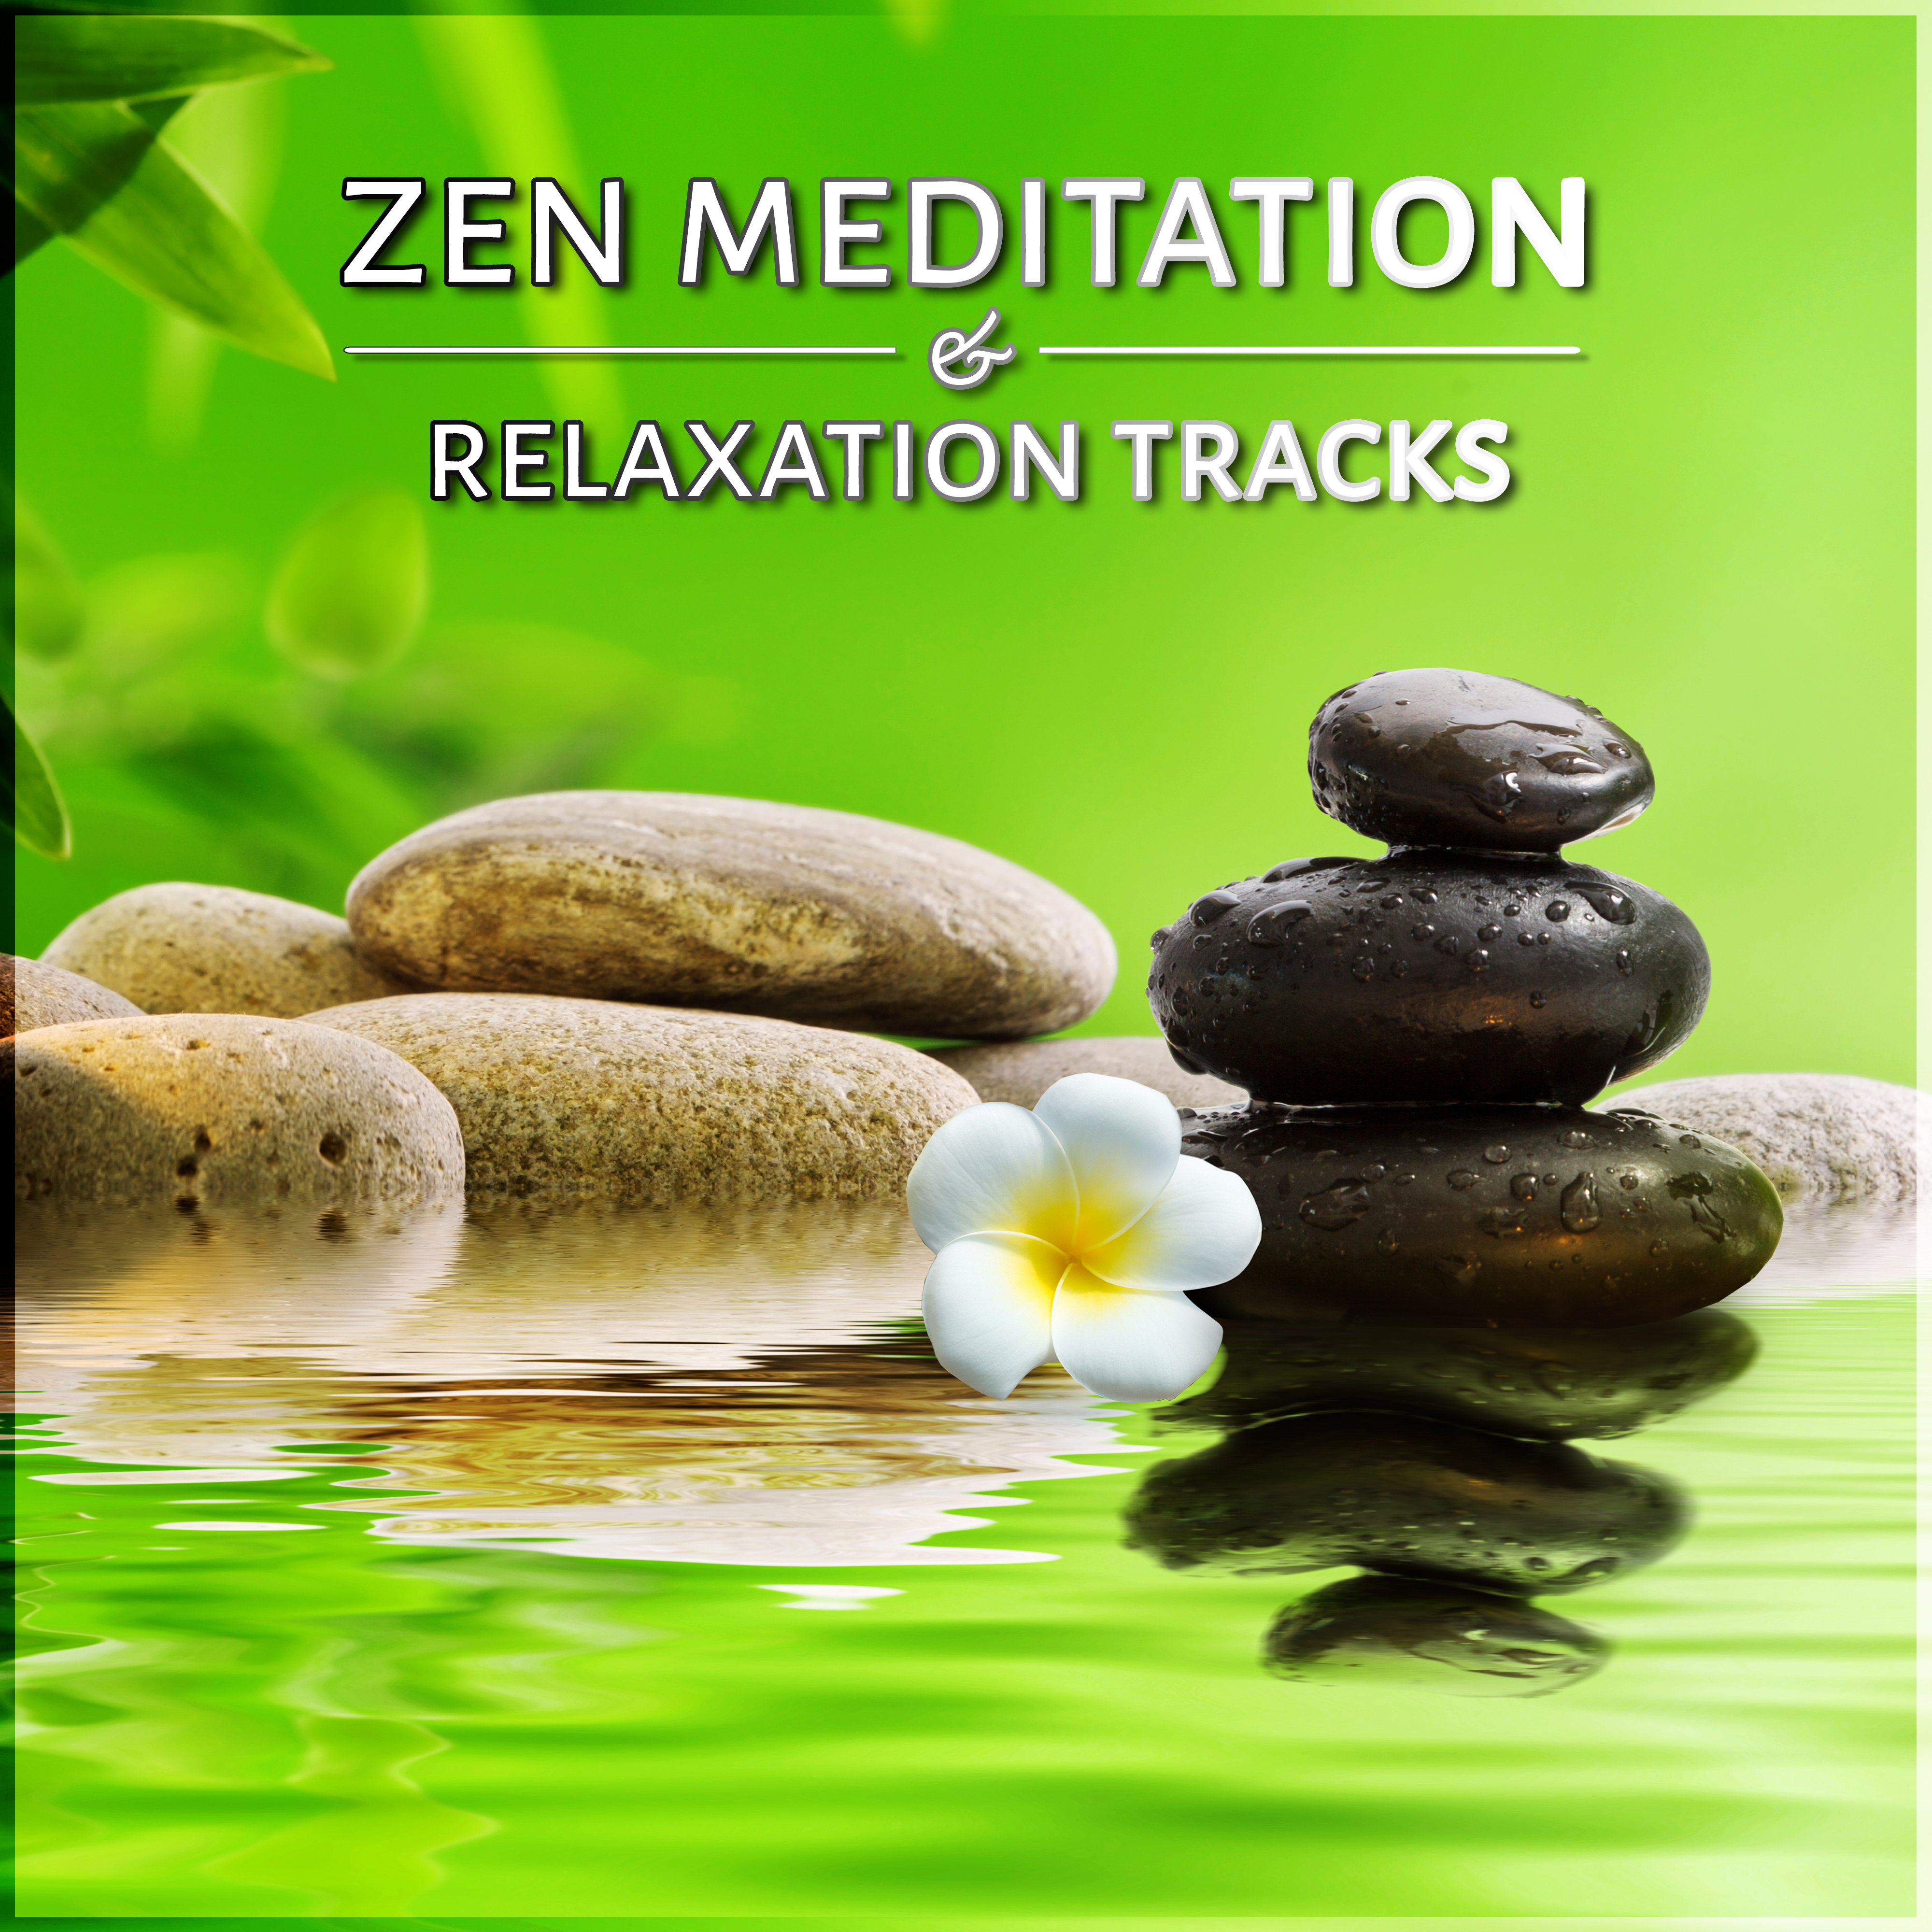 Zen Meditation & Relaxation Tracks – Healing & Sound Therapy for Stress Relief, Sleep Disorders, Concentration & Yoga